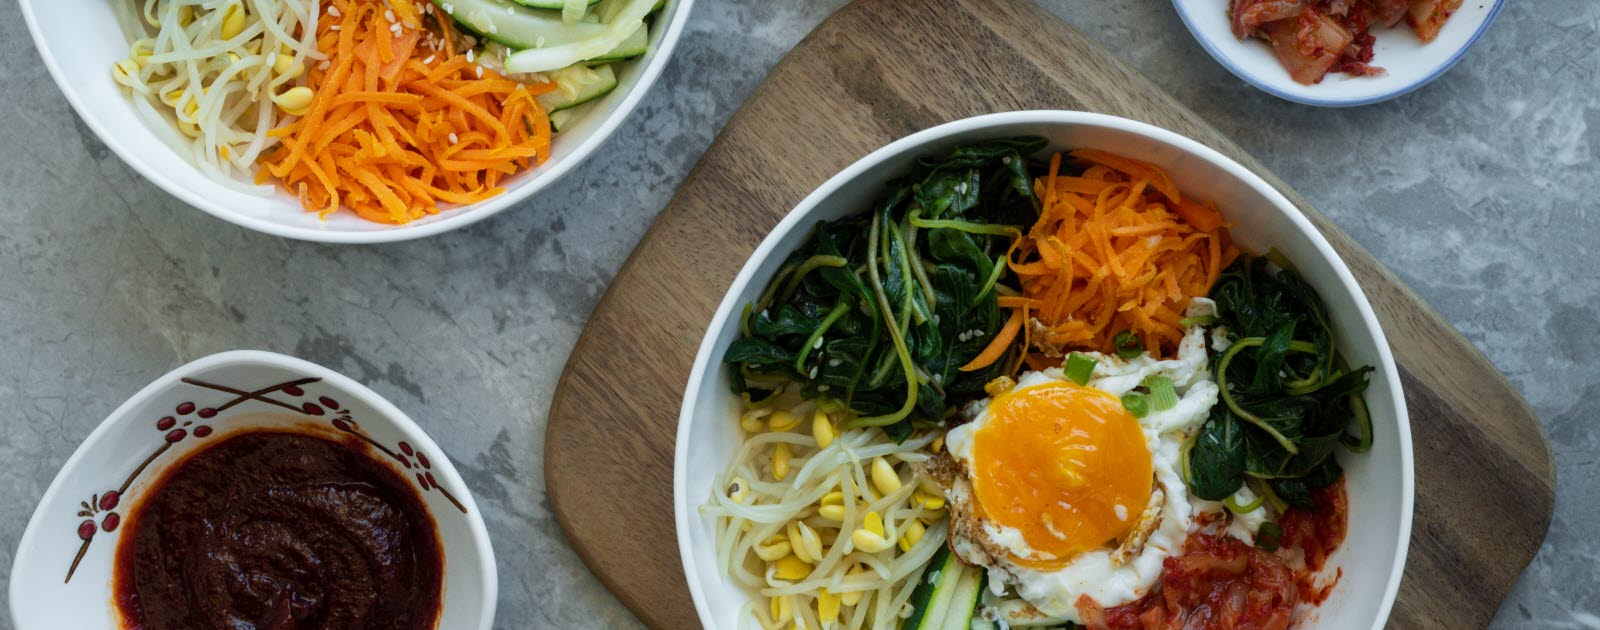 Two bowls of bibimbap, and bowls with different sides.